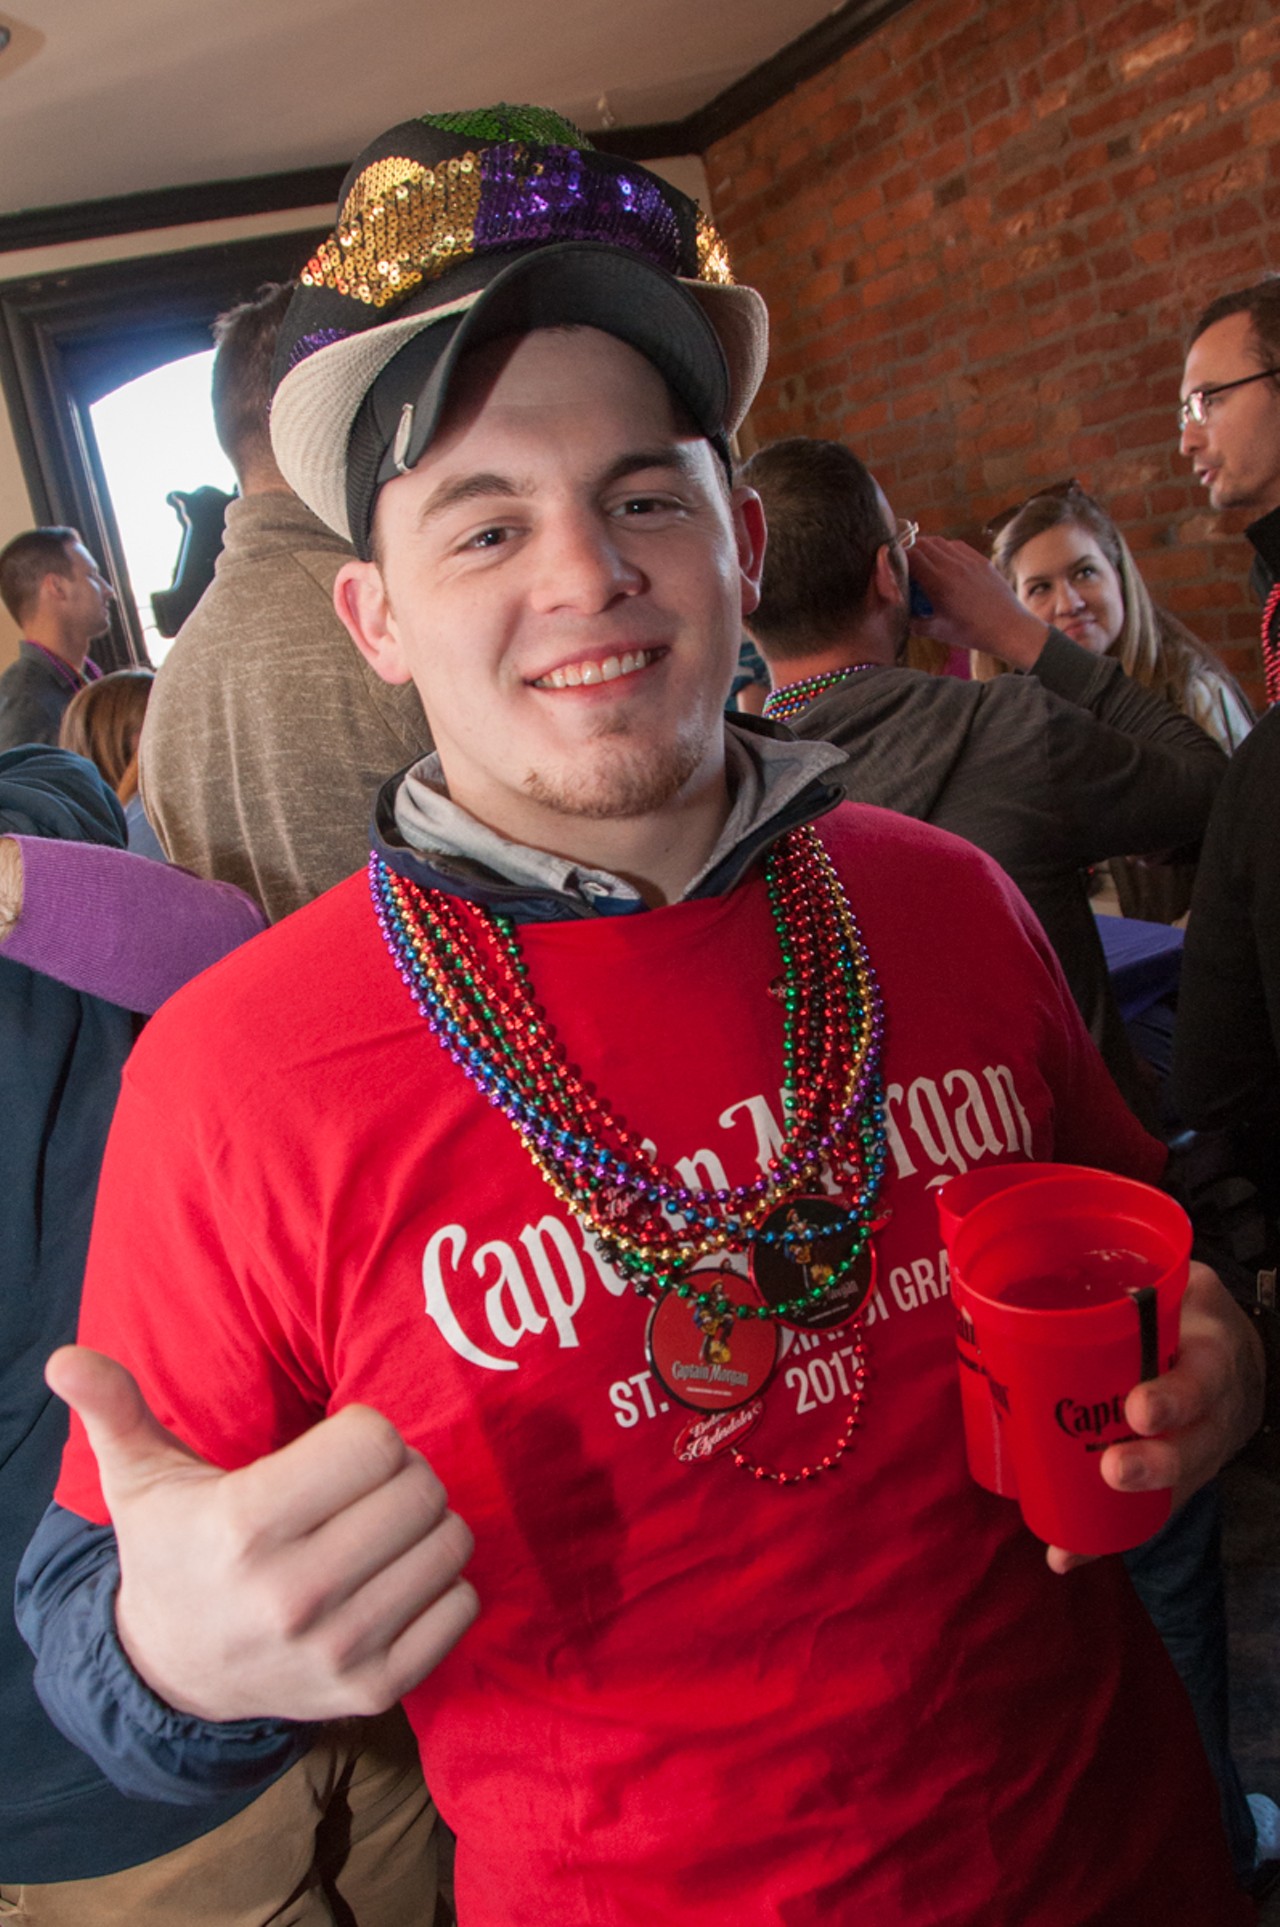 Mardi Gras 2017 at Molly's in Soulard. Photographs by Micah Usher